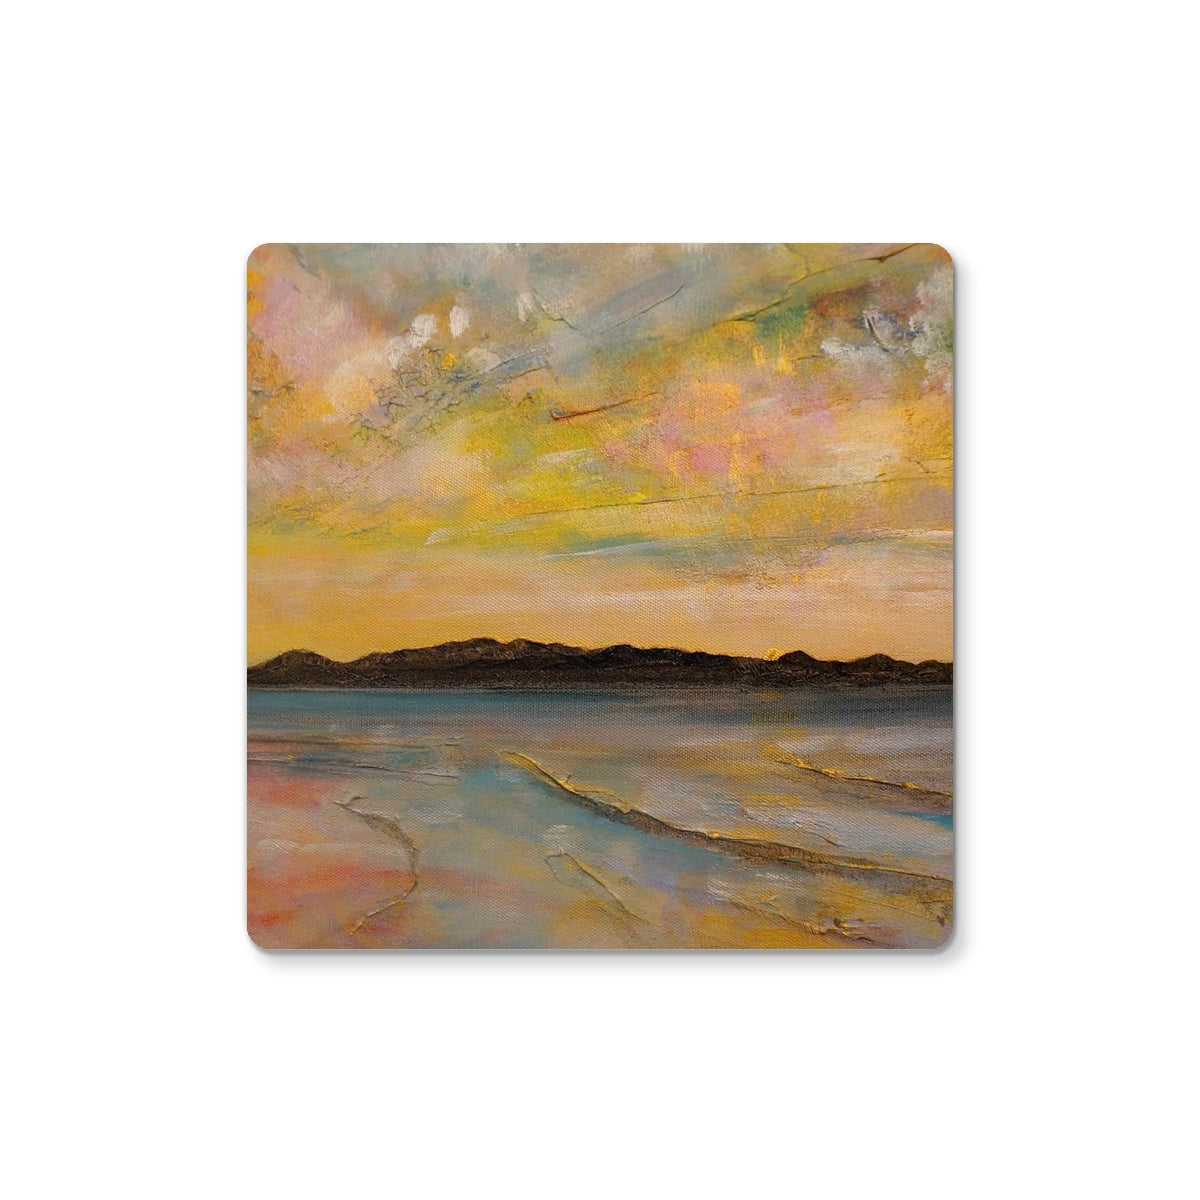 Vallay Island North Uist Art Gifts Coaster-Coasters-Hebridean Islands Art Gallery-4 Coasters-Paintings, Prints, Homeware, Art Gifts From Scotland By Scottish Artist Kevin Hunter